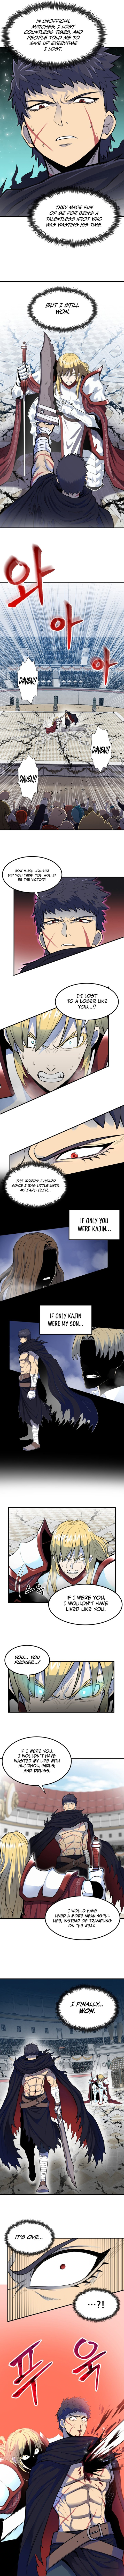 Standard of Reincarnation Chapter 1 - Page 10